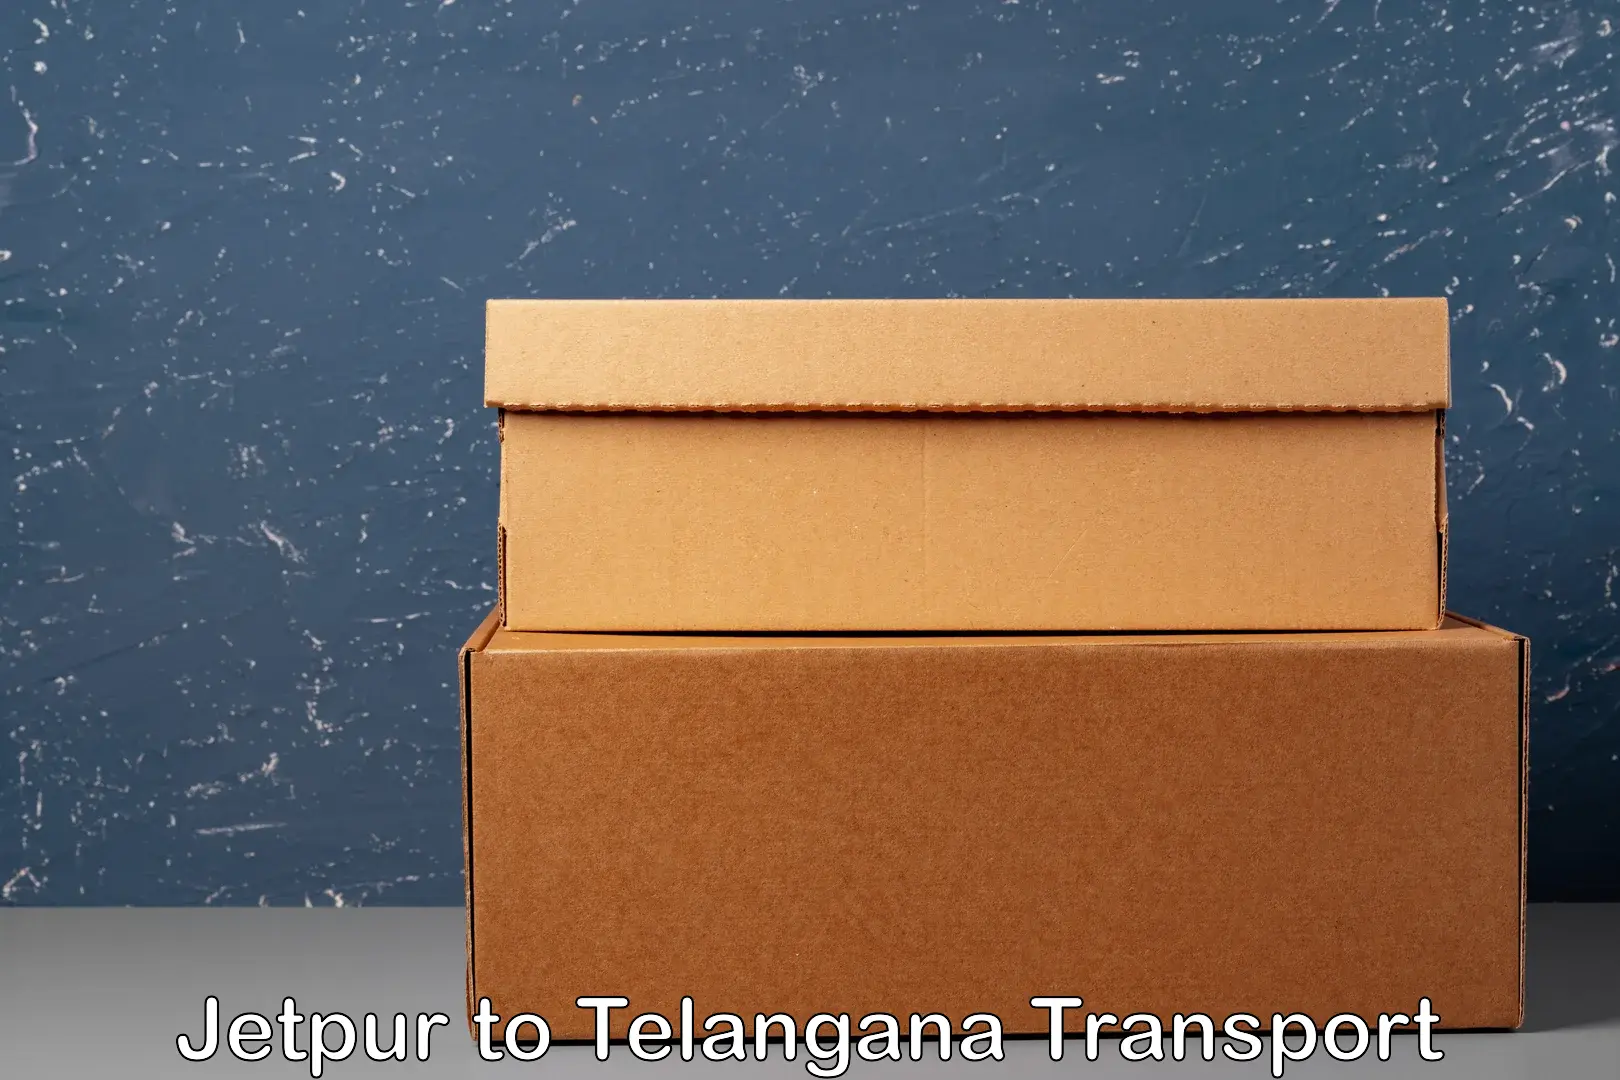 Express transport services Jetpur to Yellareddy